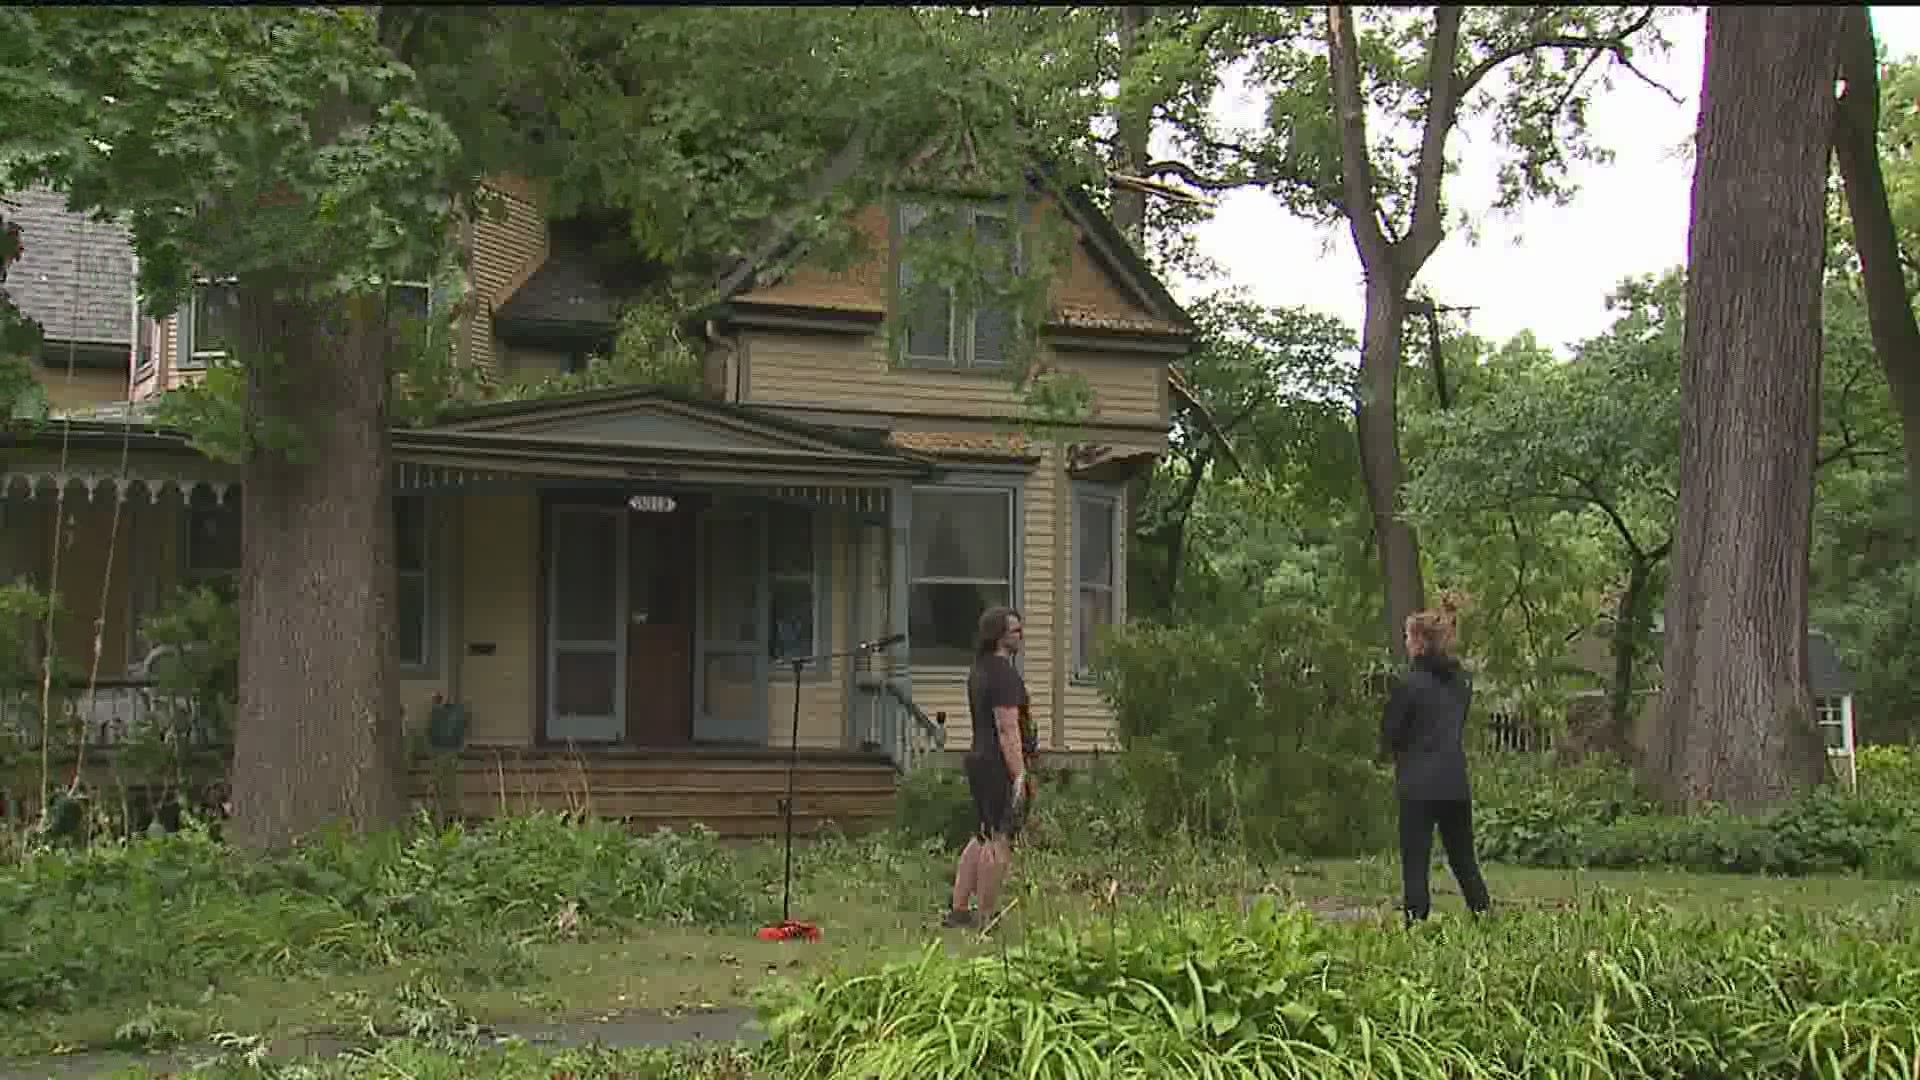 Many families are cleaning up after severe winds whip through the Quad Cities. But one family never expected this.